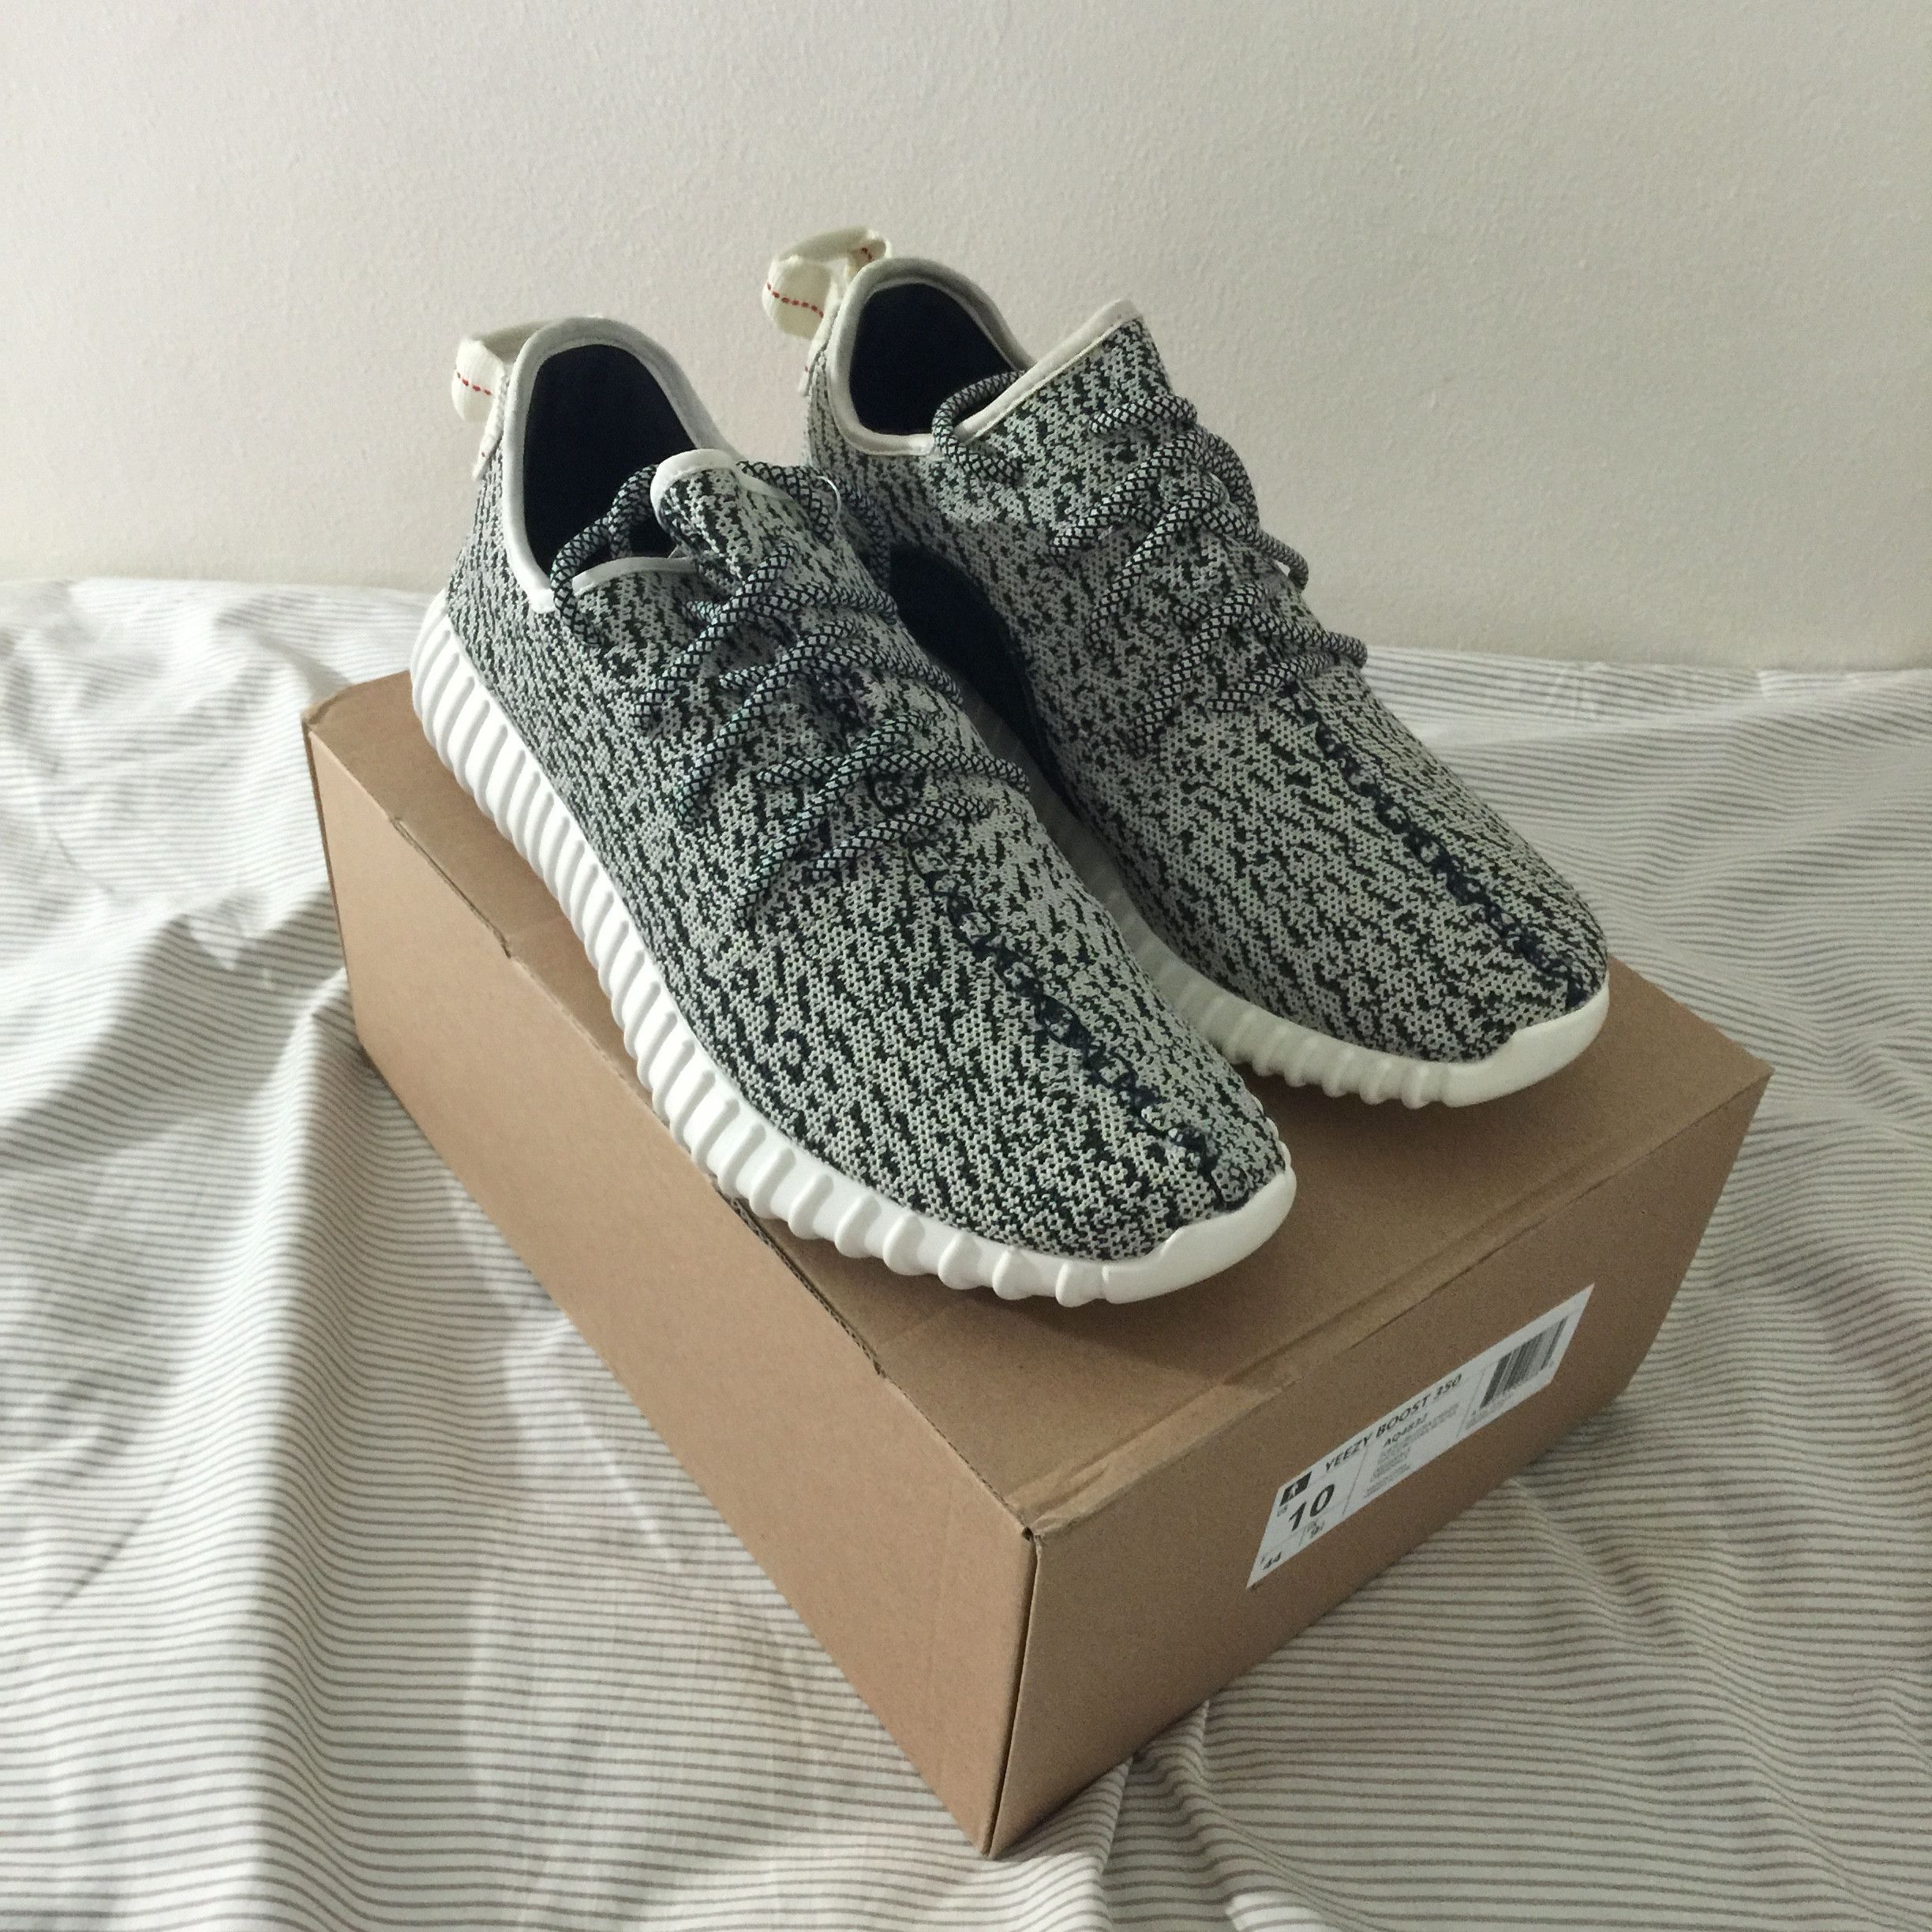 Adidas Yeezy 350 Boost Size US 10 / EU 43 - 1 Preview